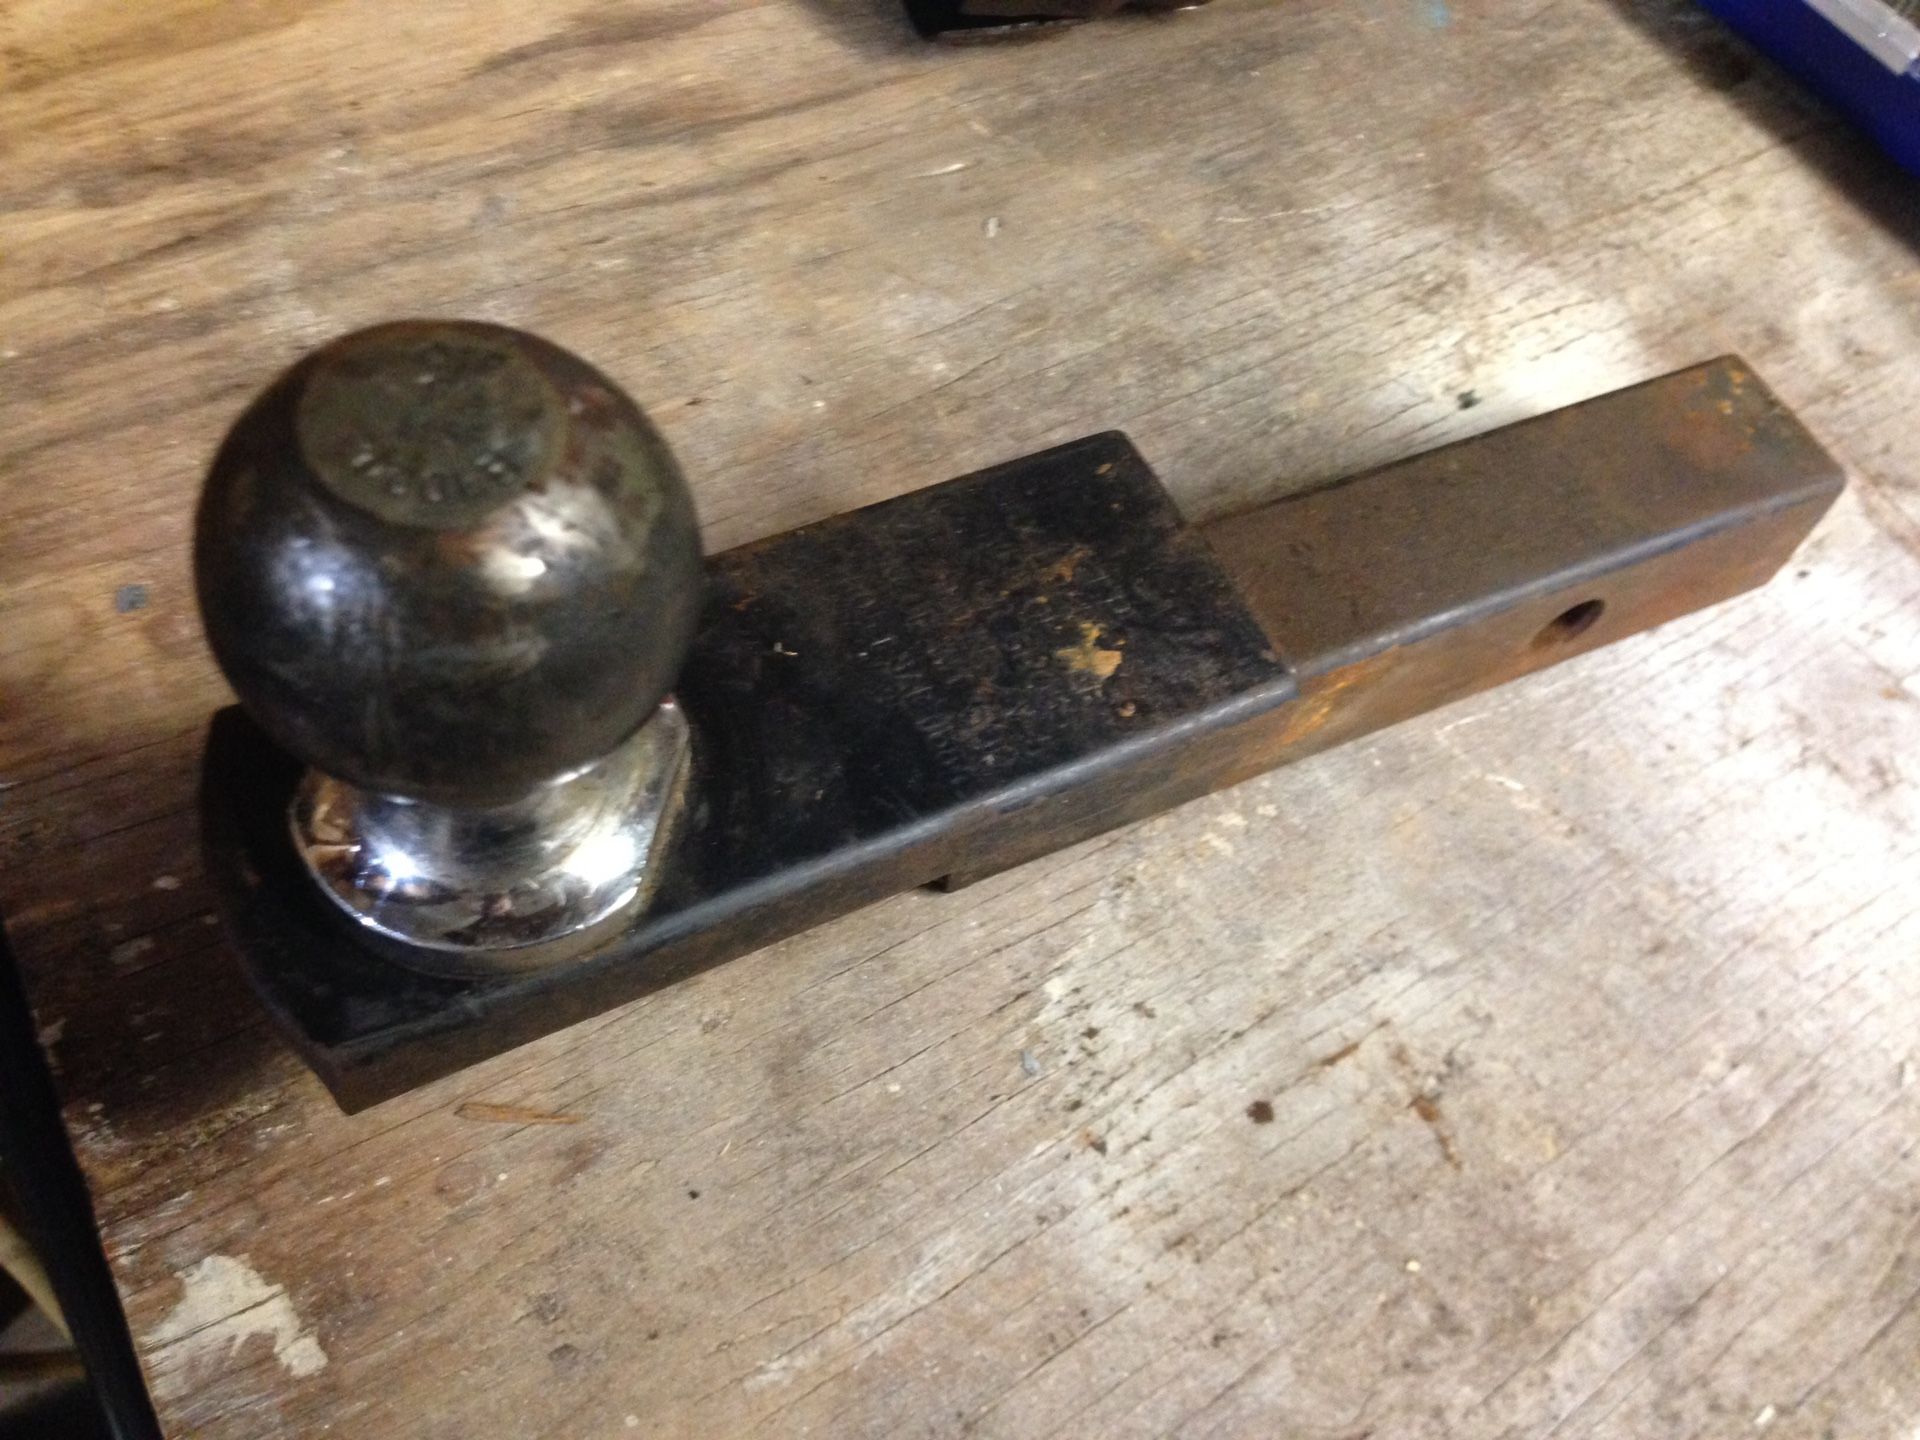 Trailer hitch insert and 1 7/8" ball